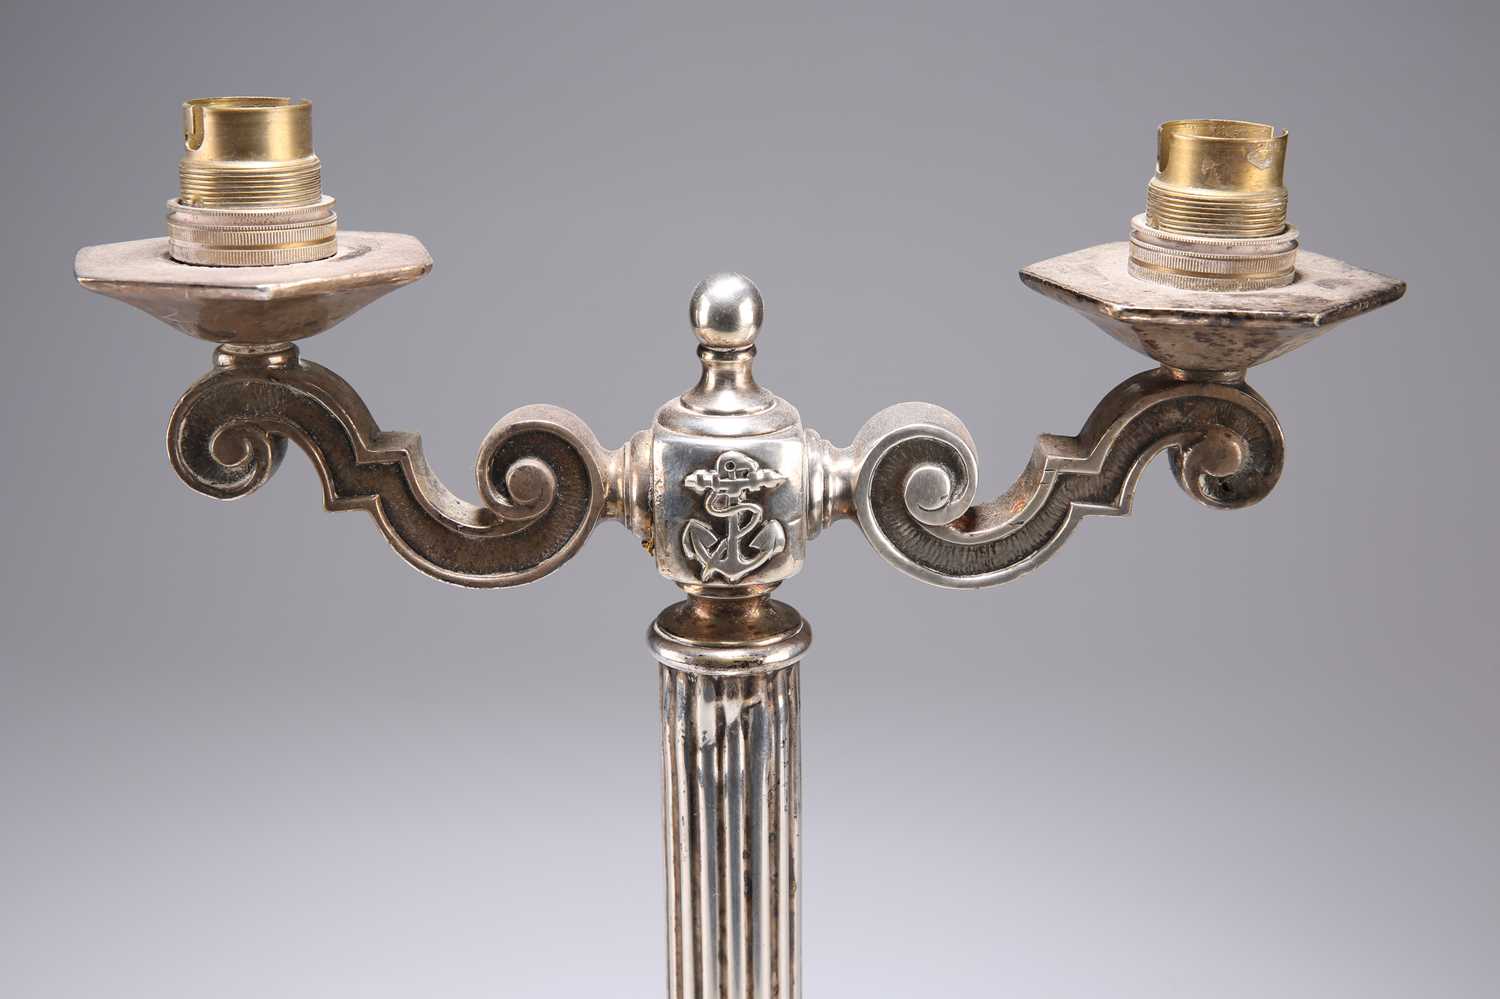 A PAIR OF EARLY 20TH CENTURY SILVER PLATED TABLE LAMPS, POSSIBLY FROM AN OCEAN LINER - Image 2 of 2